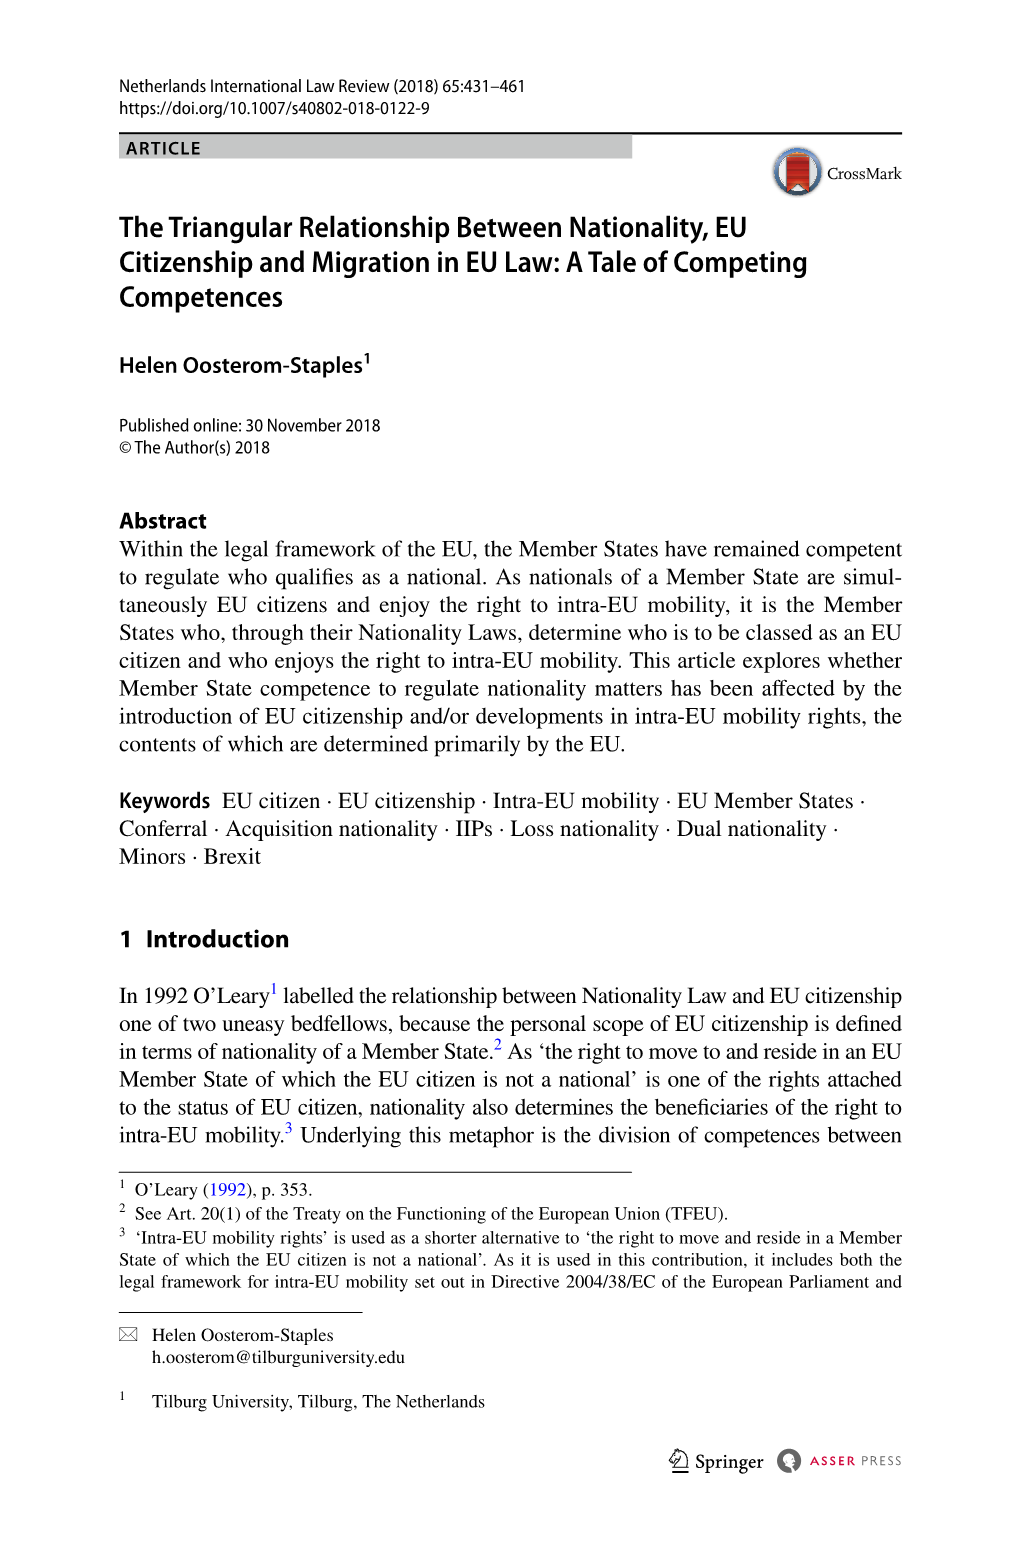 The Triangular Relationship Between Nationality, EU Citizenship and Migration in EU Law: a Tale of Competing Competences